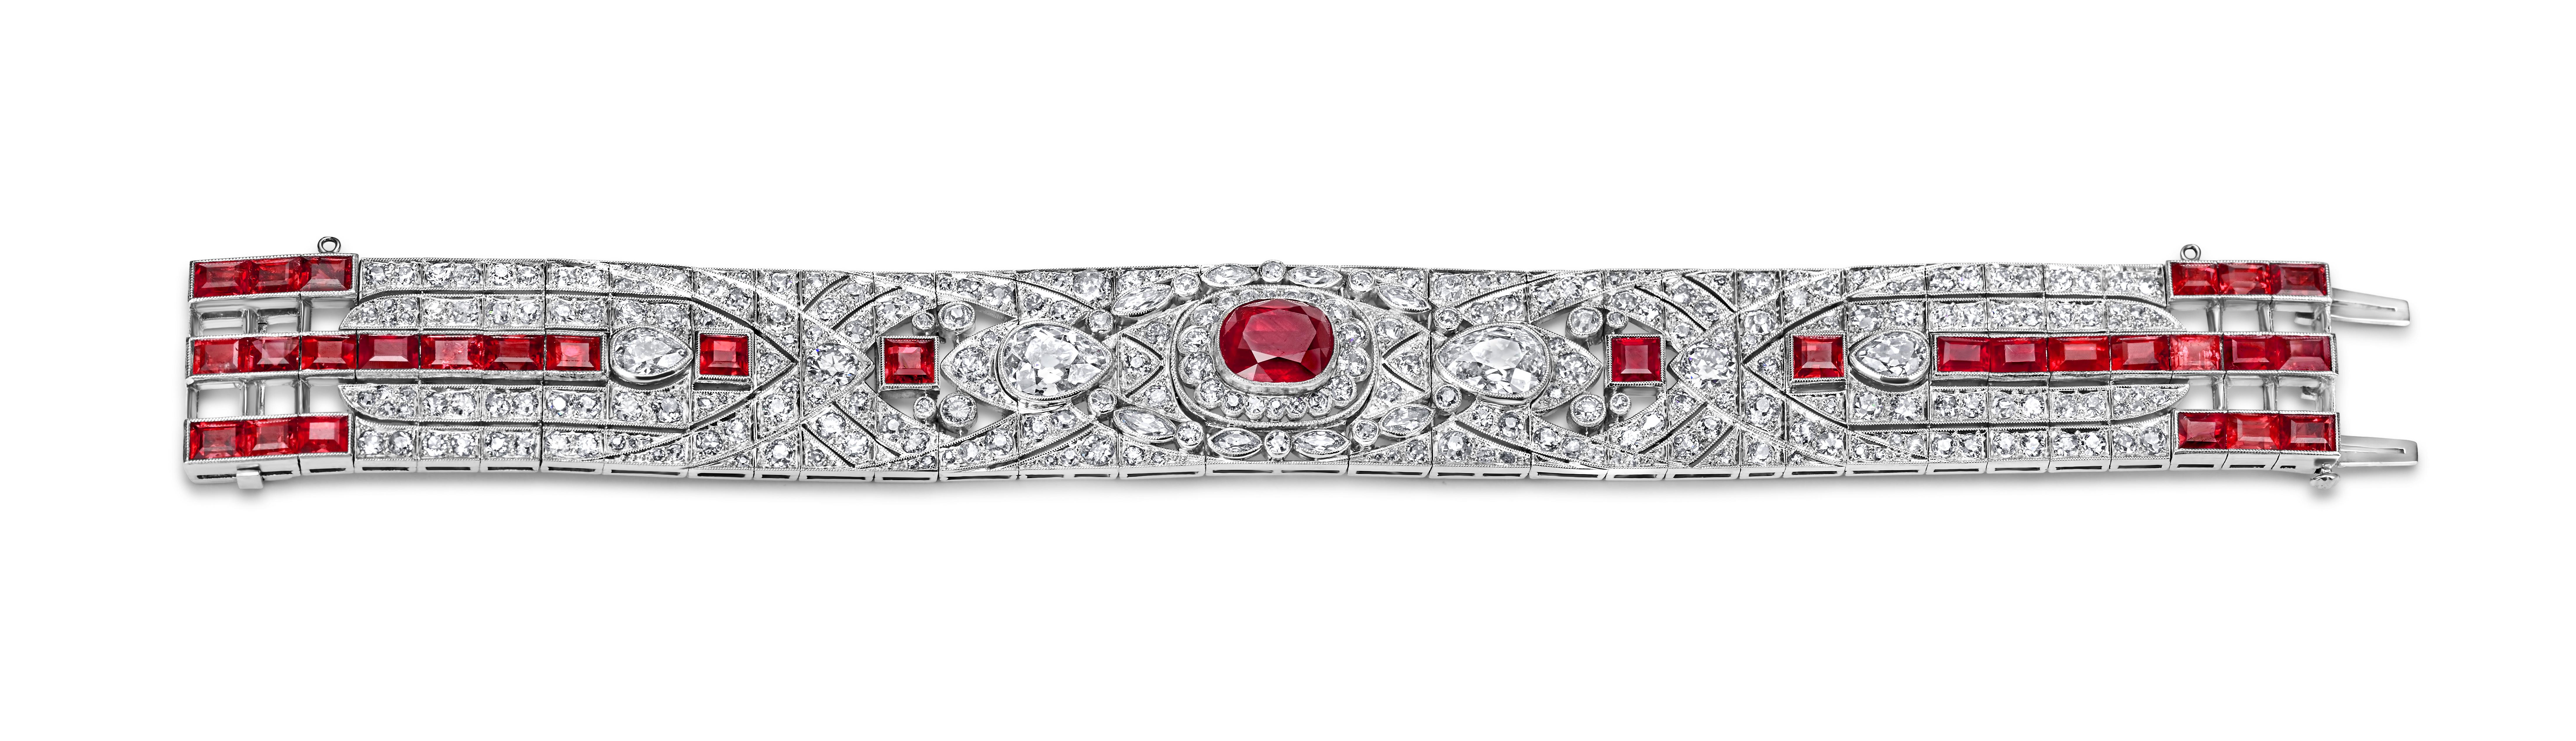 Platinum Artdeco Bracelet  with 9.72ct Rubies and 13.69 ct Diamonds ,Estate to His Majesty Sultan Qaboos Bin Said

Asprey London Box with it,but I couldn t find any hallmarks of Asprey in Bracelet.
All other pieces from Estate are from Asprey London